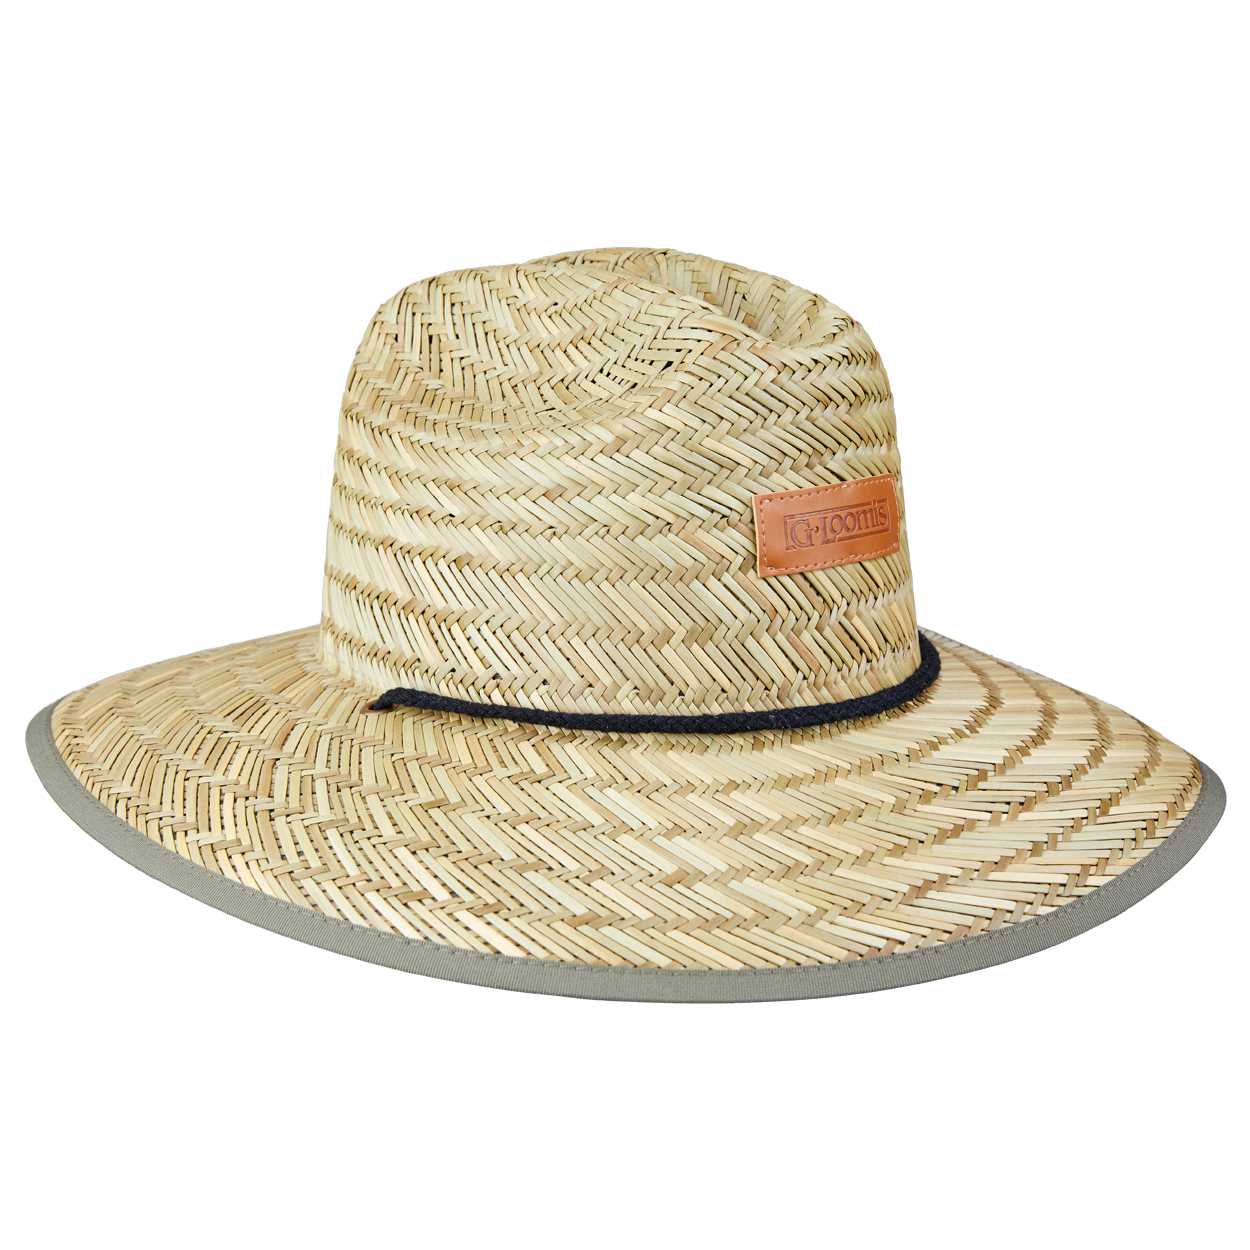 G. Loomis 2022 Sunseeker Straw Fishing Hat With Leather Patch - G.Loomis